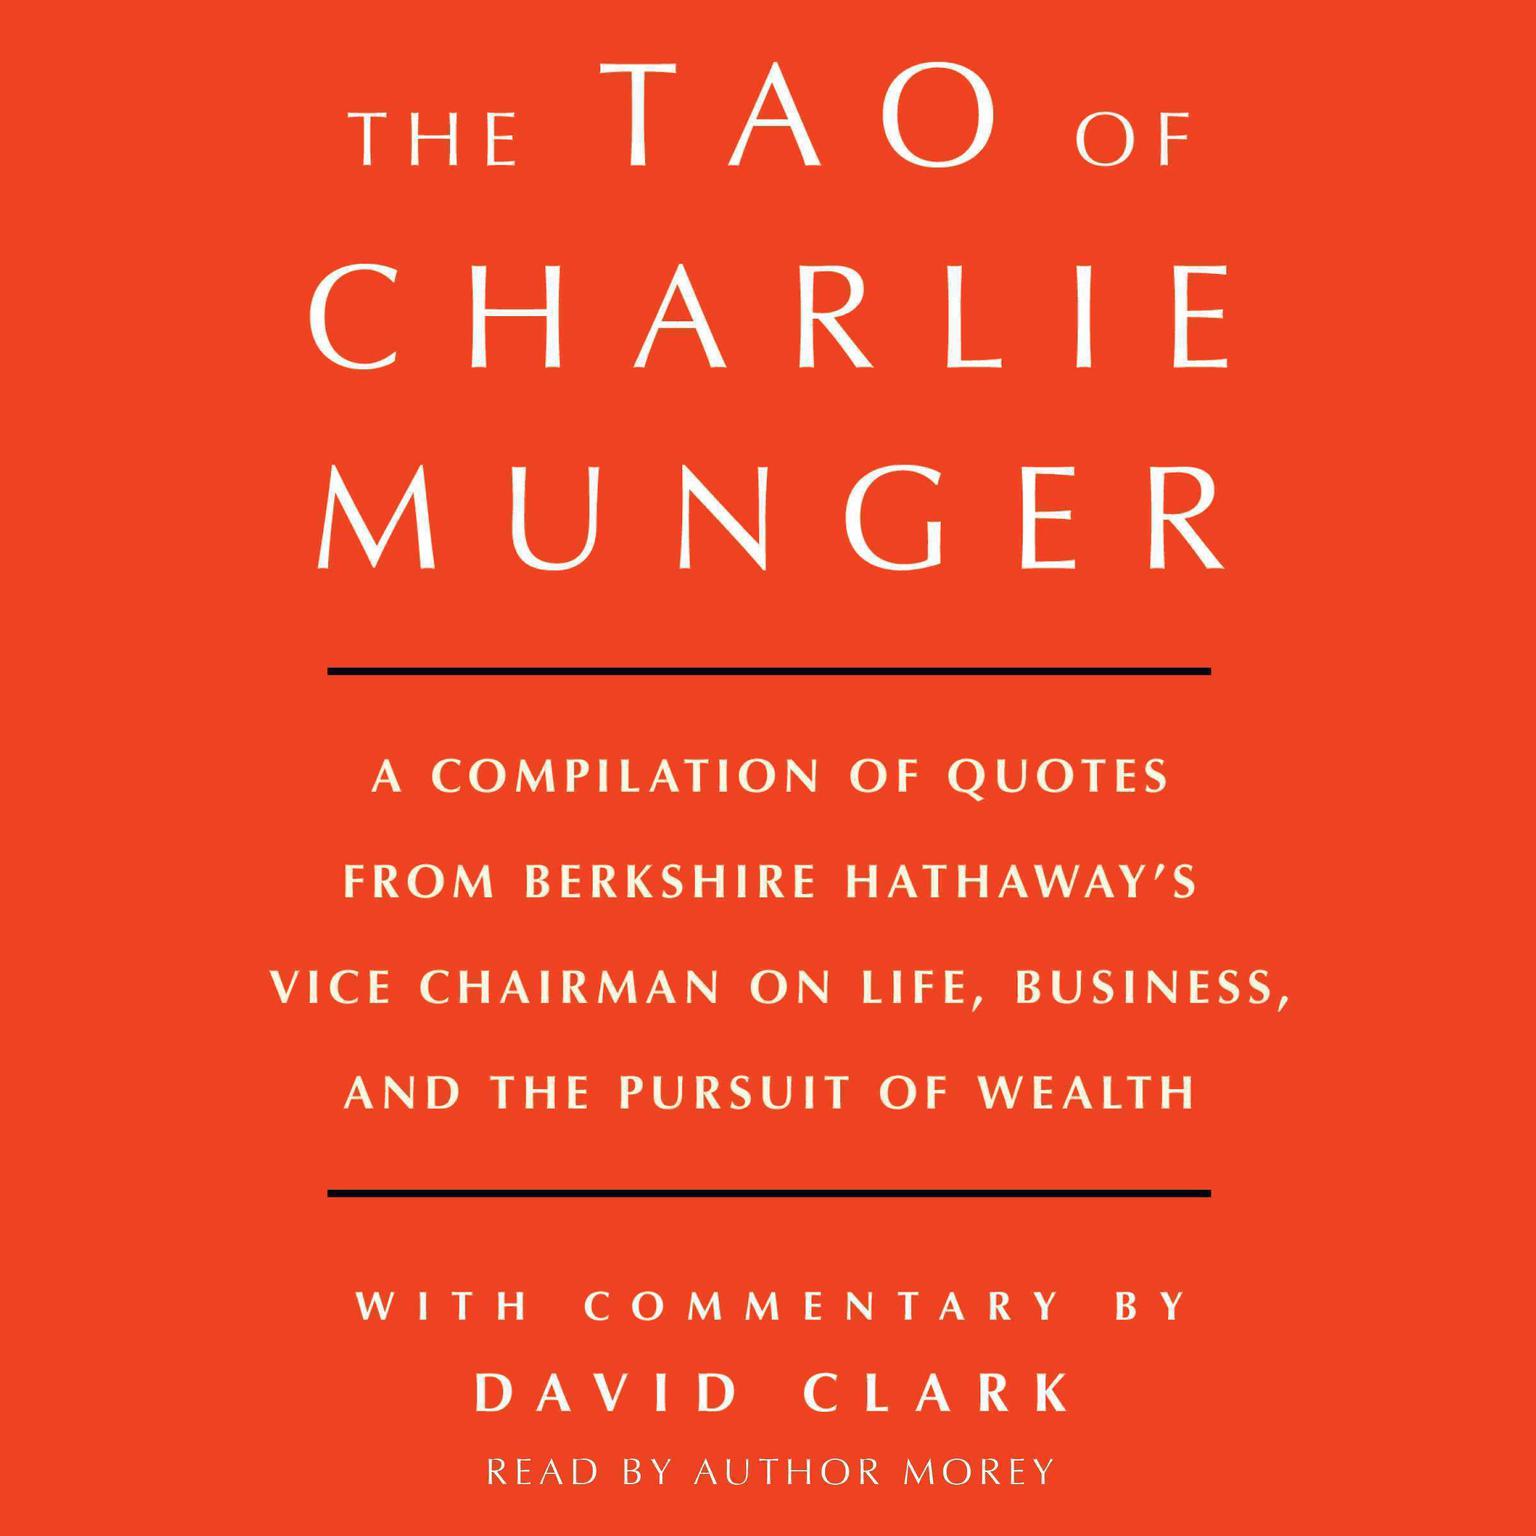 Tao of Charlie Munger: A Compilation of Quotes from Berkshire Hathaways Vice Chairman on Life, Business, and the Pursuit of Wealth With Commentary by David Clark Audiobook, by David Clark